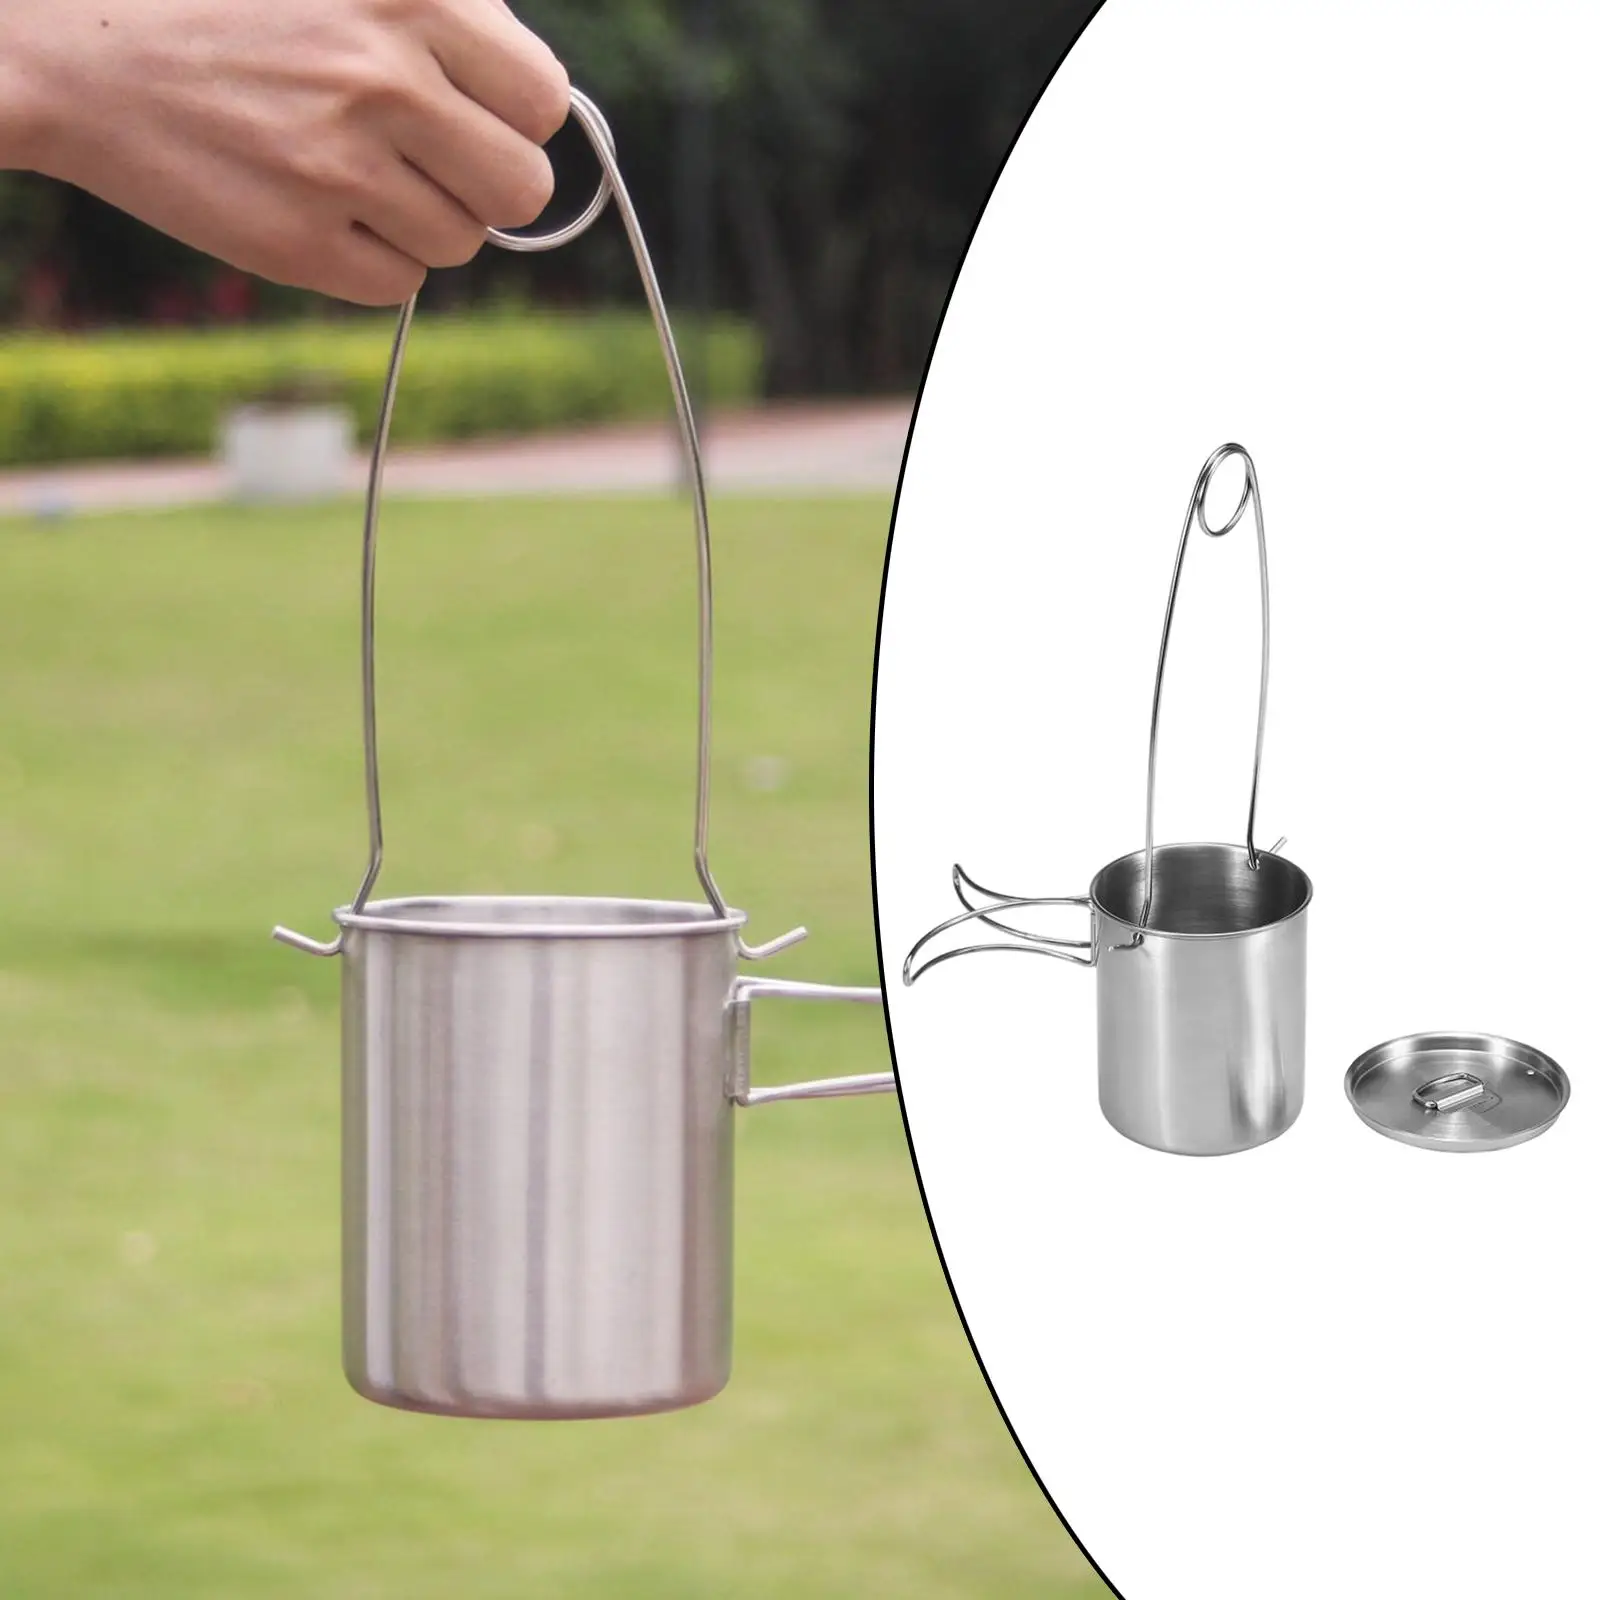 Portable Camping  Mug  Stainless Steel Utensils Lightweight Reusable Heating for Cooking Hiking Picnic